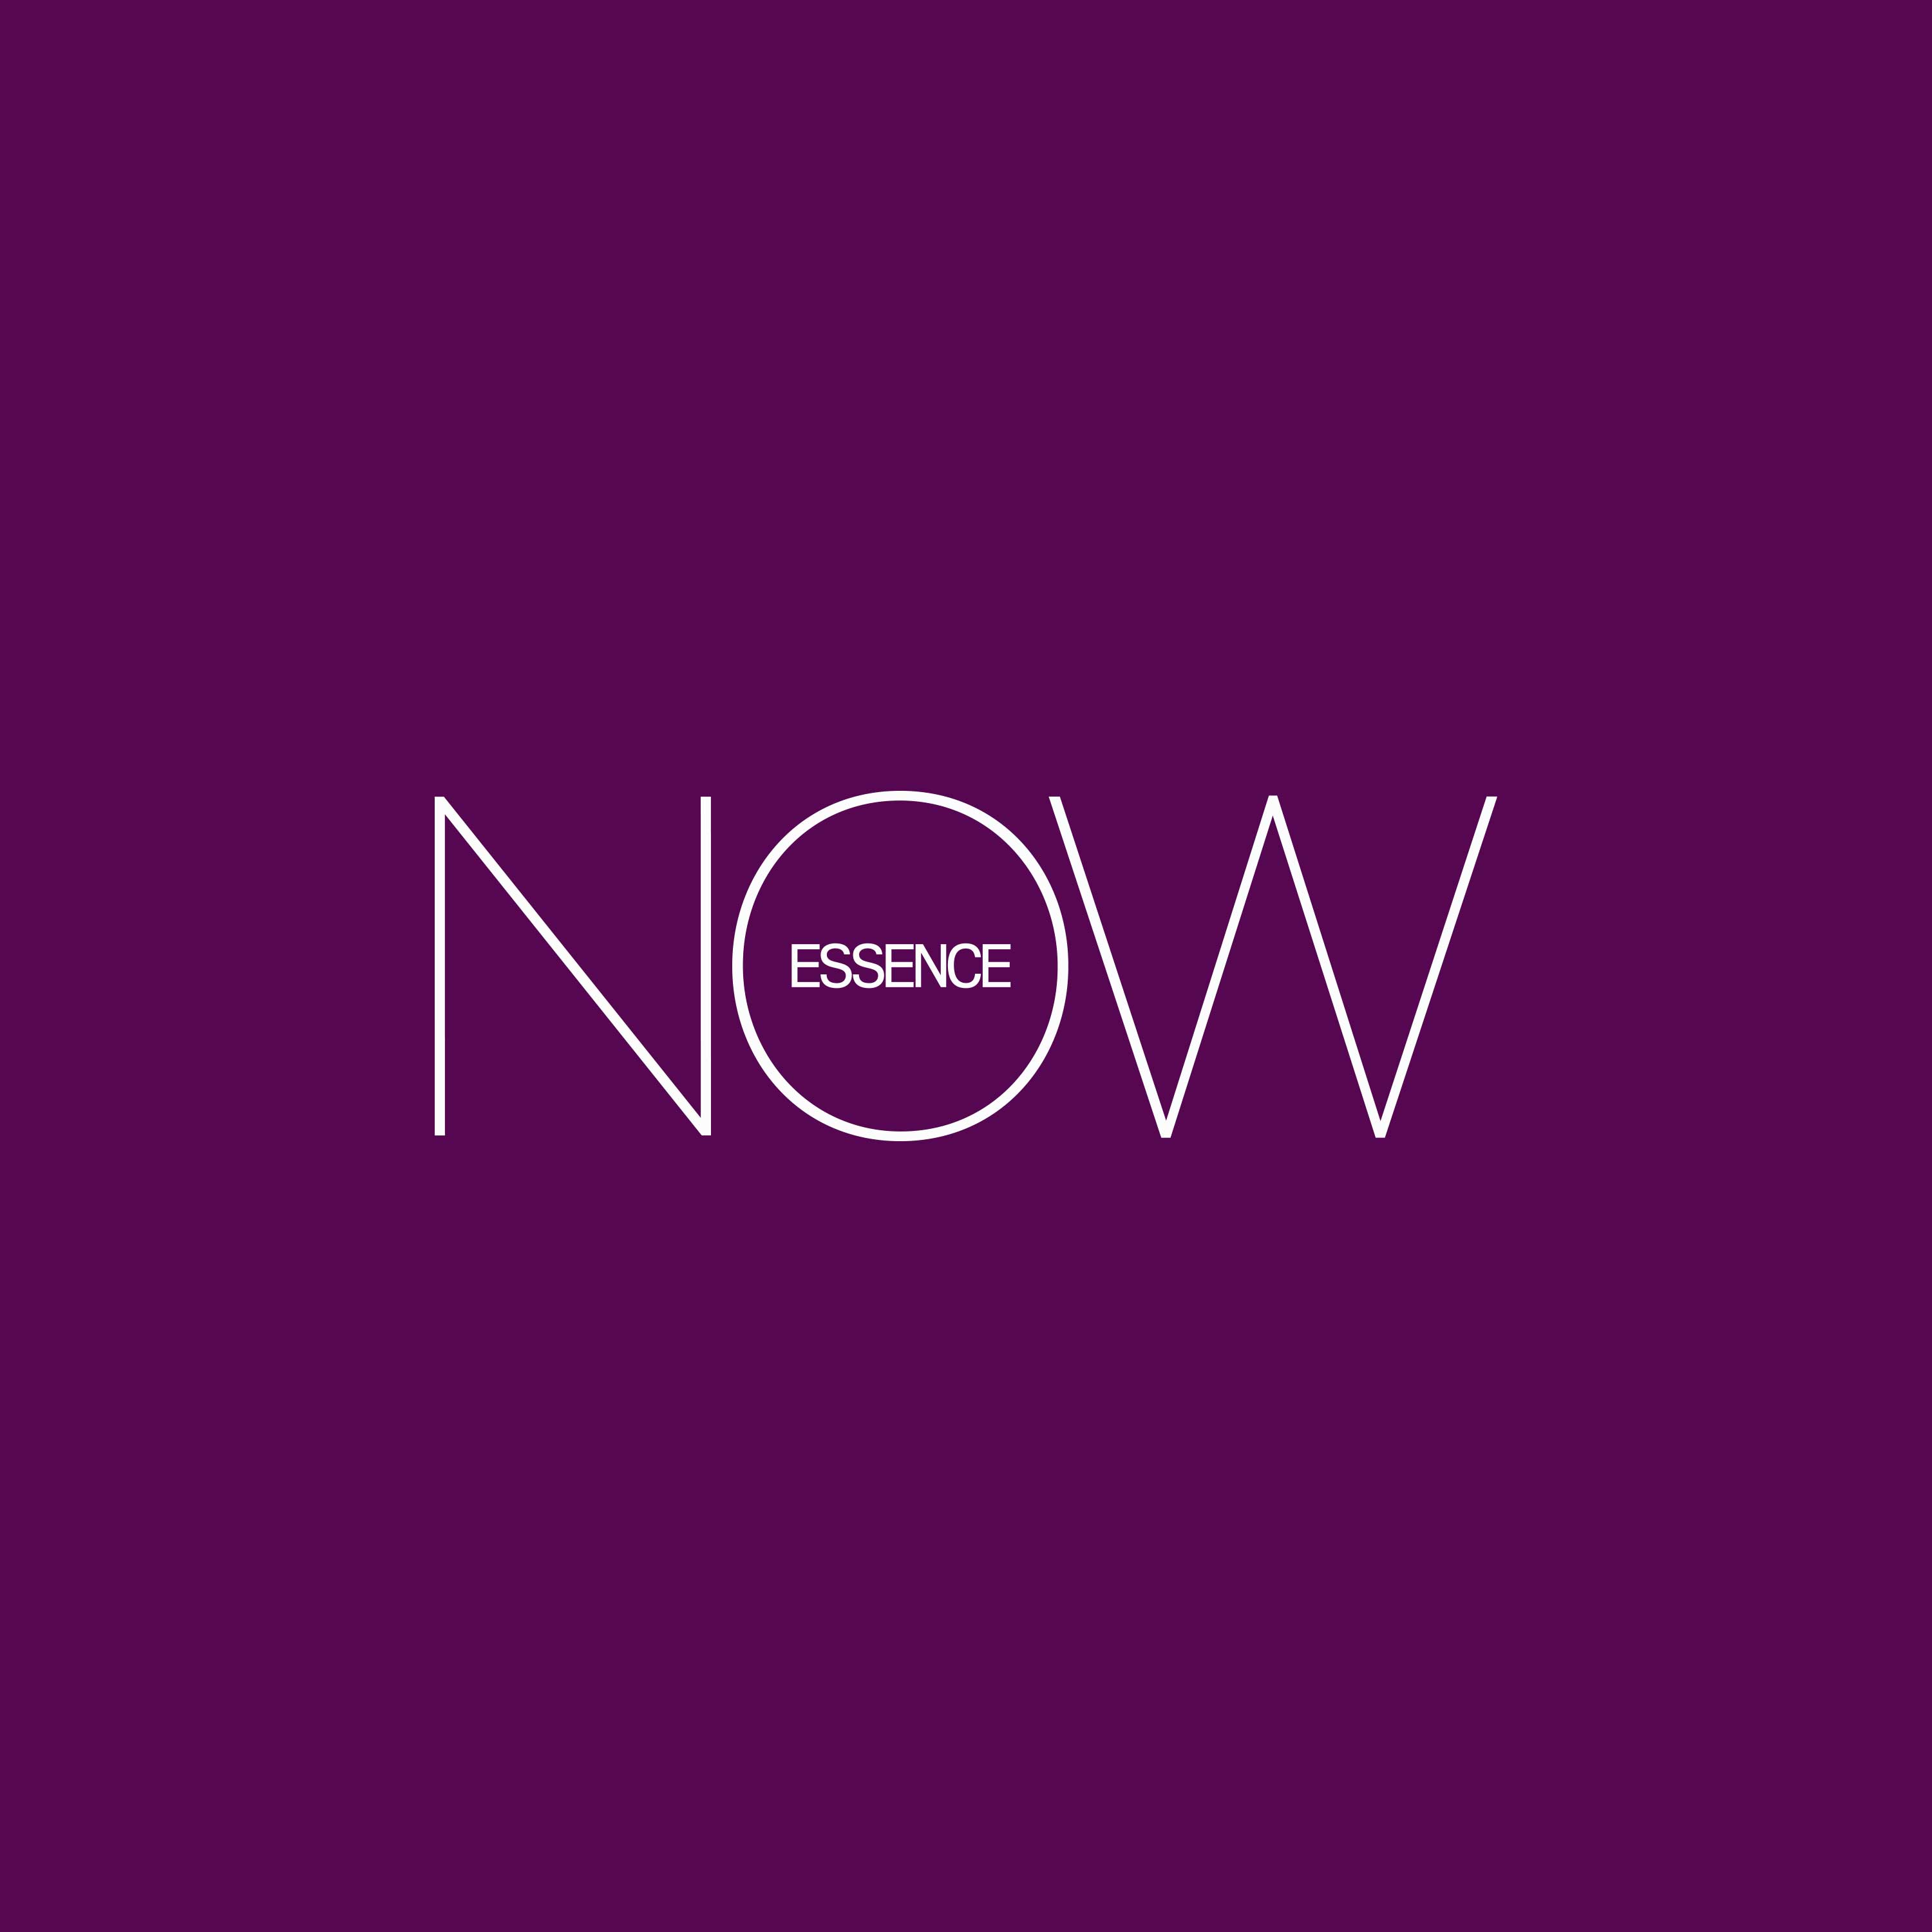 It's Here! 'ESSENCE Now' Talk Show Will Debut On Twitter Today
